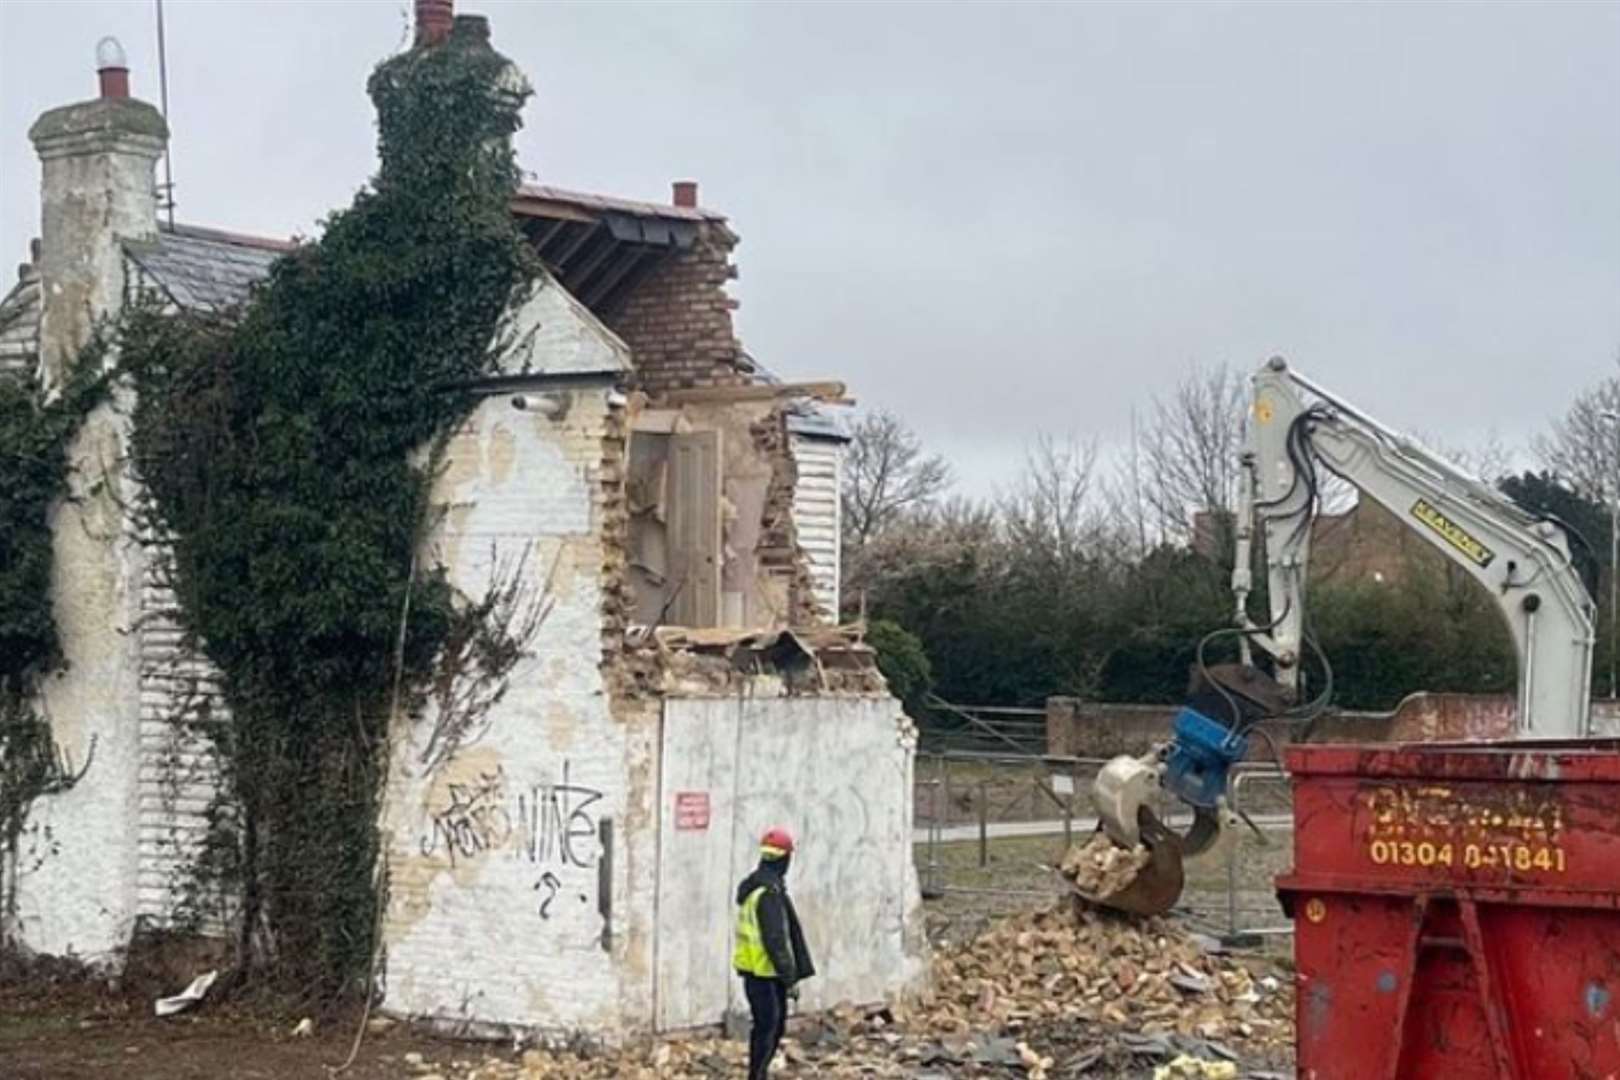 Street-art collector Jacob Smith wants the artwork to stay in Herne Bay. Picture: Banksy/Instagram